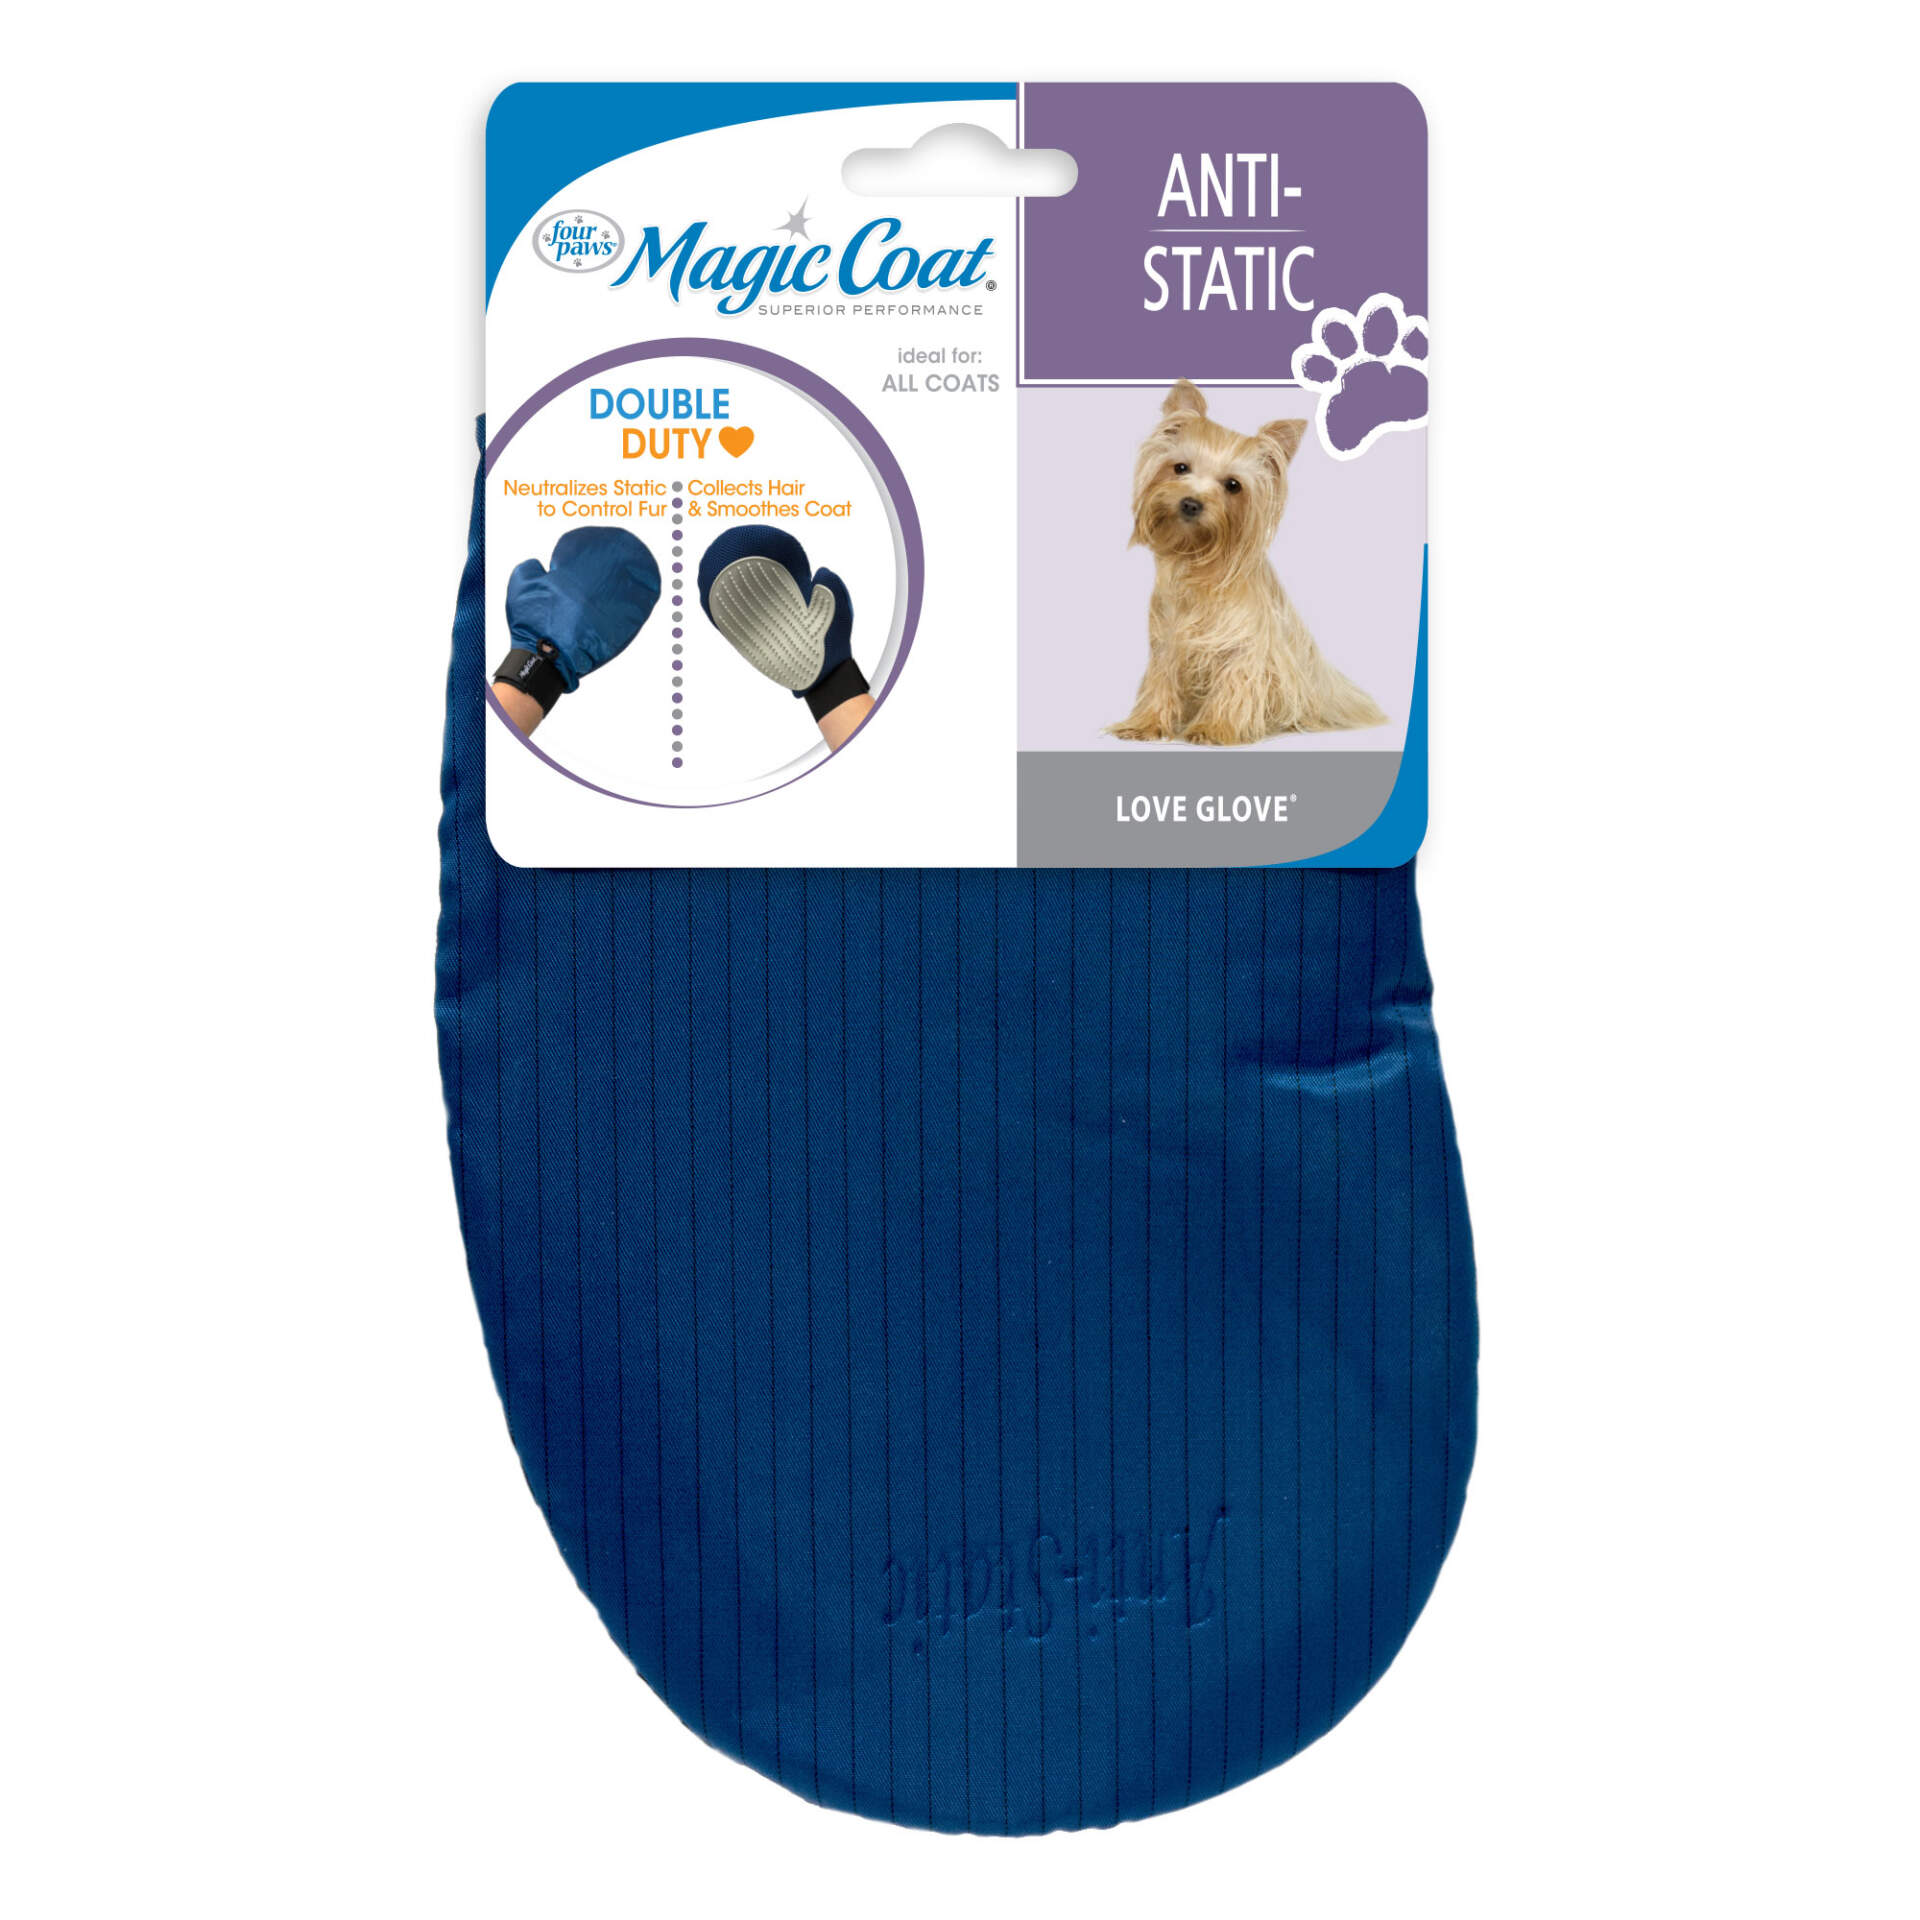 045663973100-love-glove-dog-groominggloove-antistatic-dogbrush-in-packaging-front